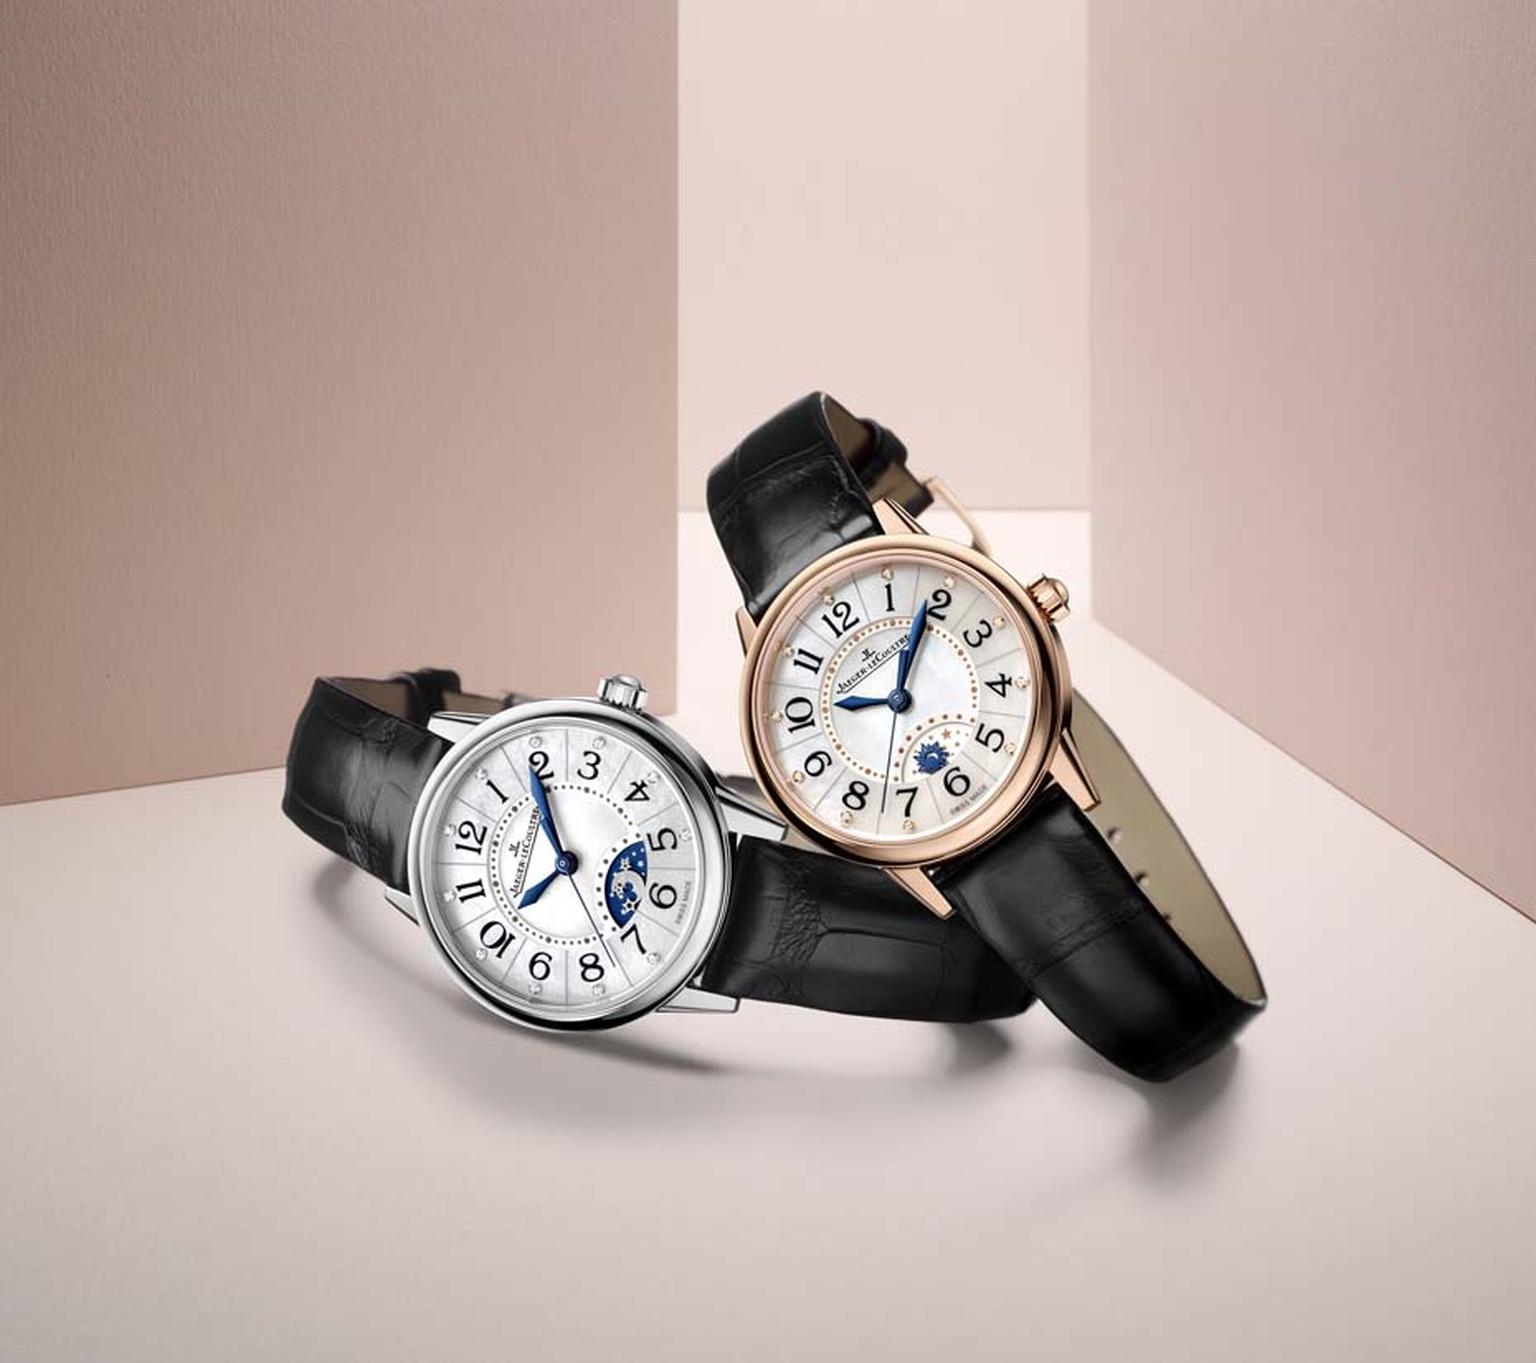 Jaeger-LeCoultre Rendez-Vous Night & Day watches are equipped with a day/night indicator in an arched window at 6 o’clock. The large black numerals, crowned with a diamond chaton, can be easily read against the glowing mother-of-pearl dial.